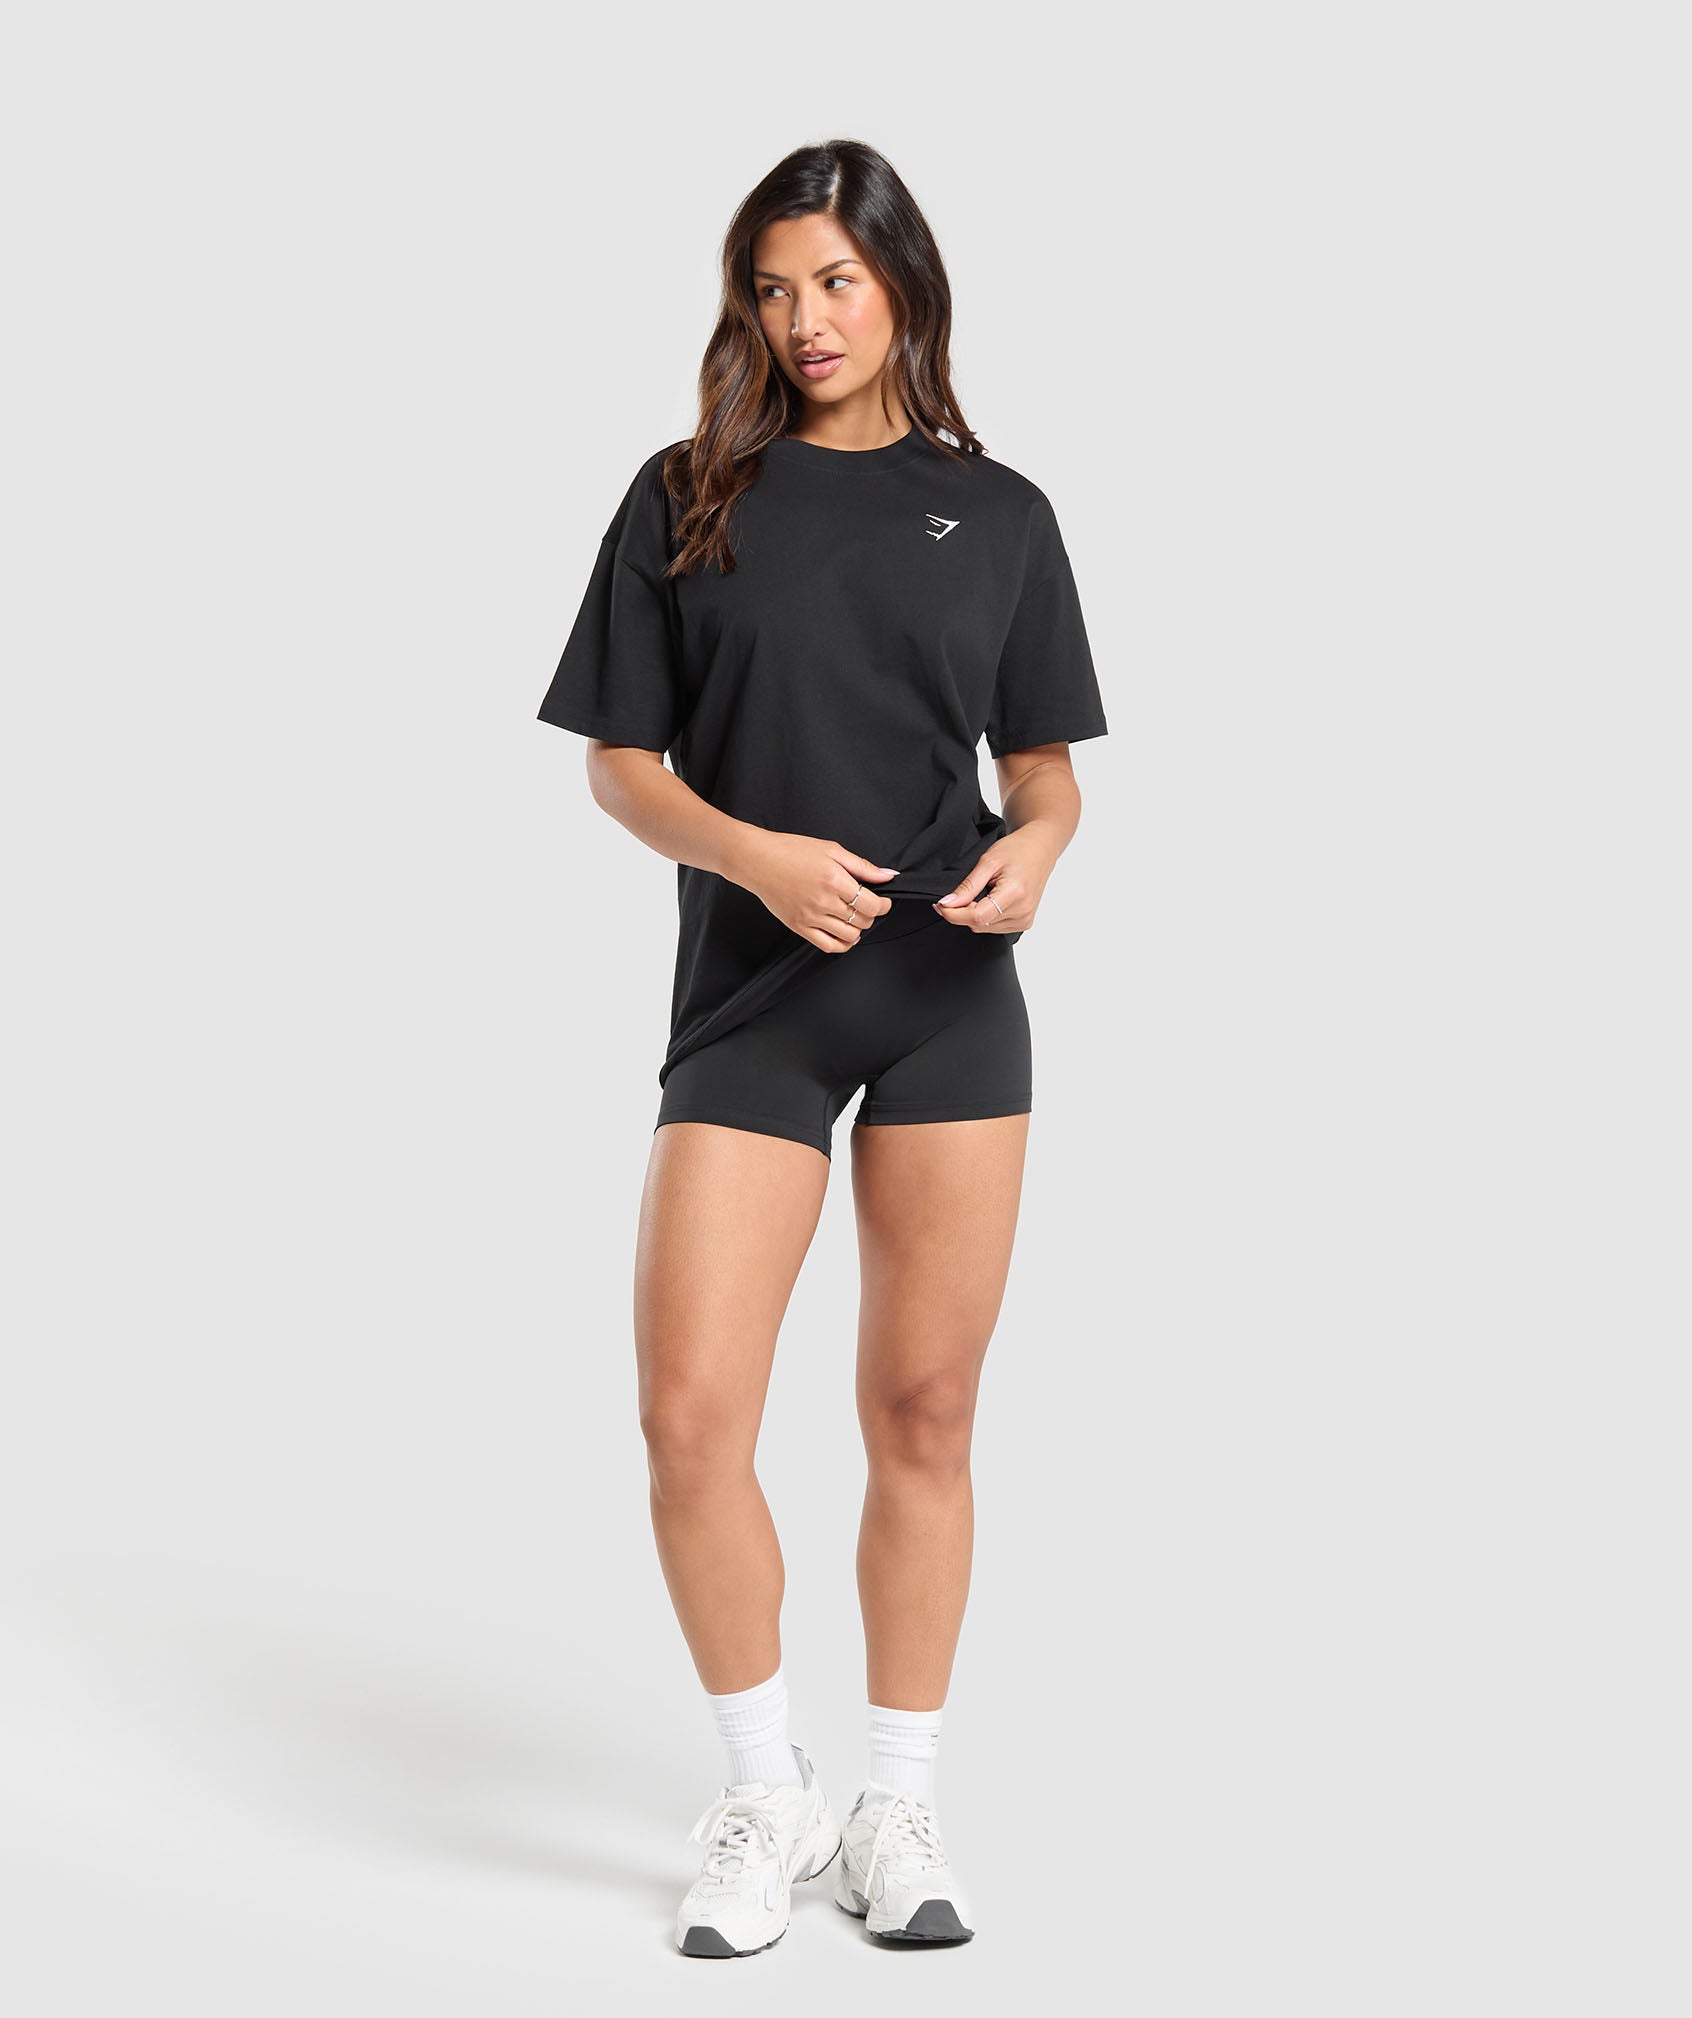 Training Oversized T-Shirt in Black - view 4